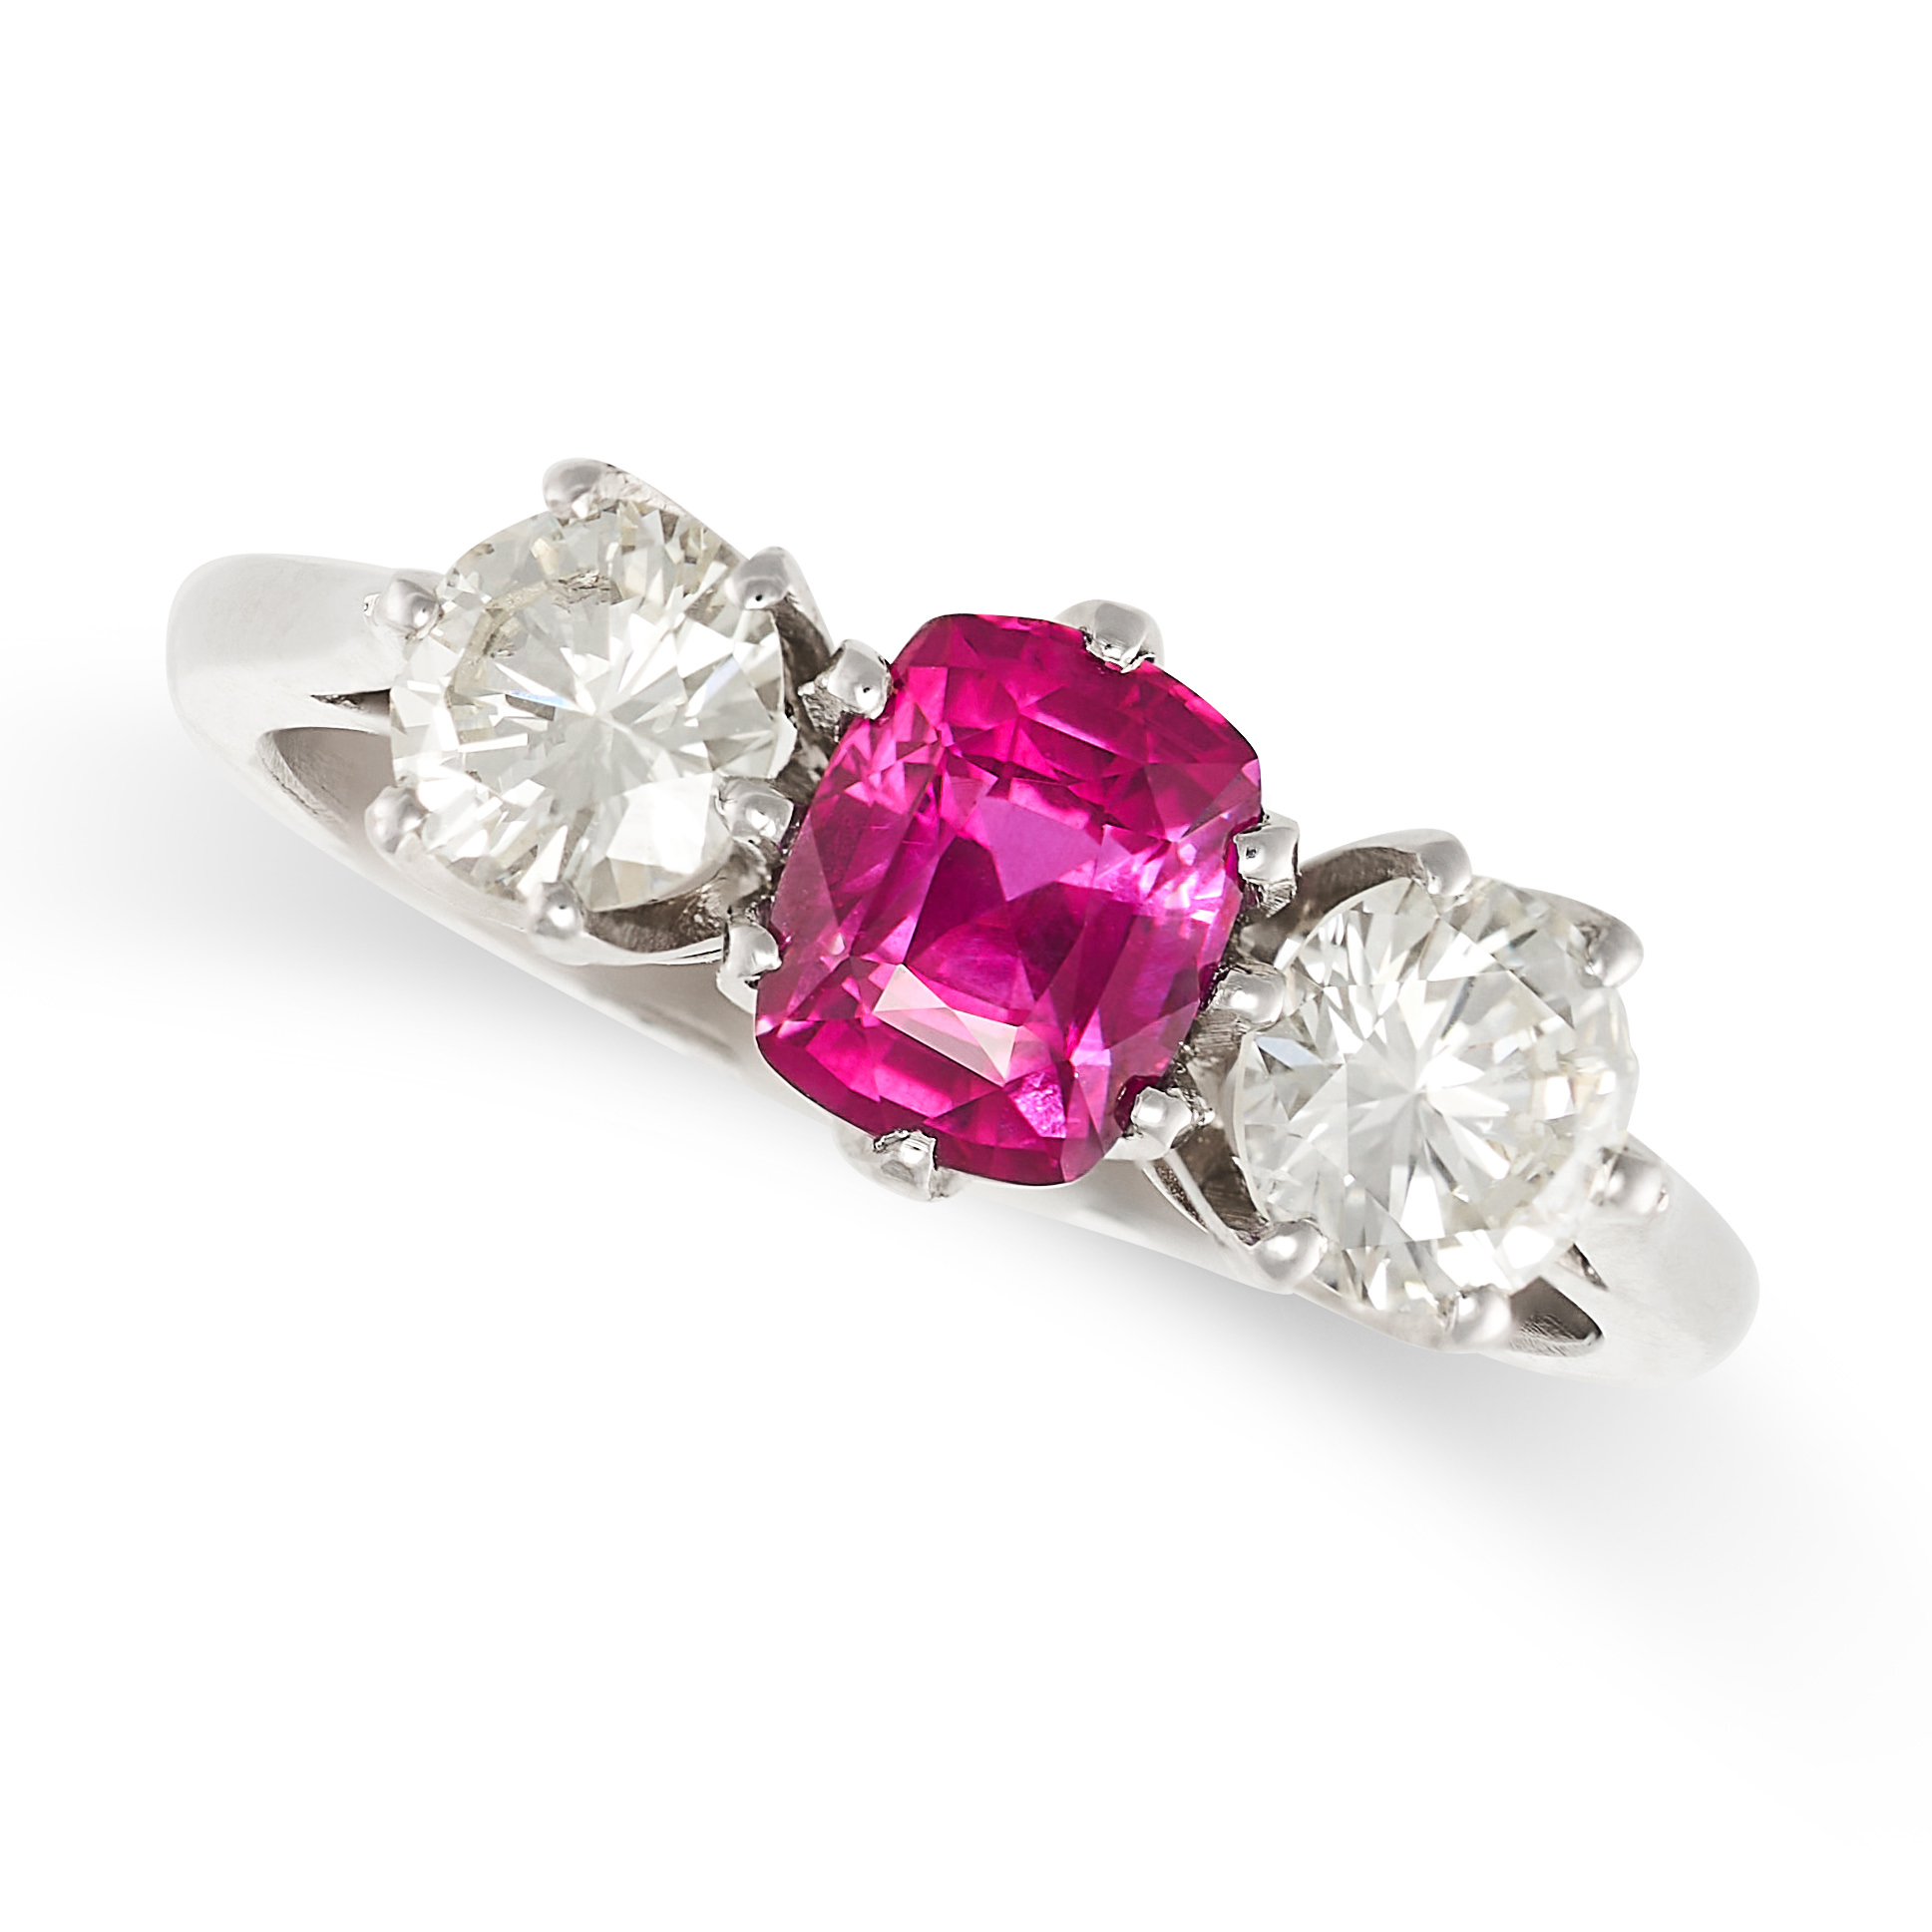 A FINE UNHEATED RUBY AND DIAMOND THREE STONE RING in 18ct white gold, set with a cushion cut ruby of